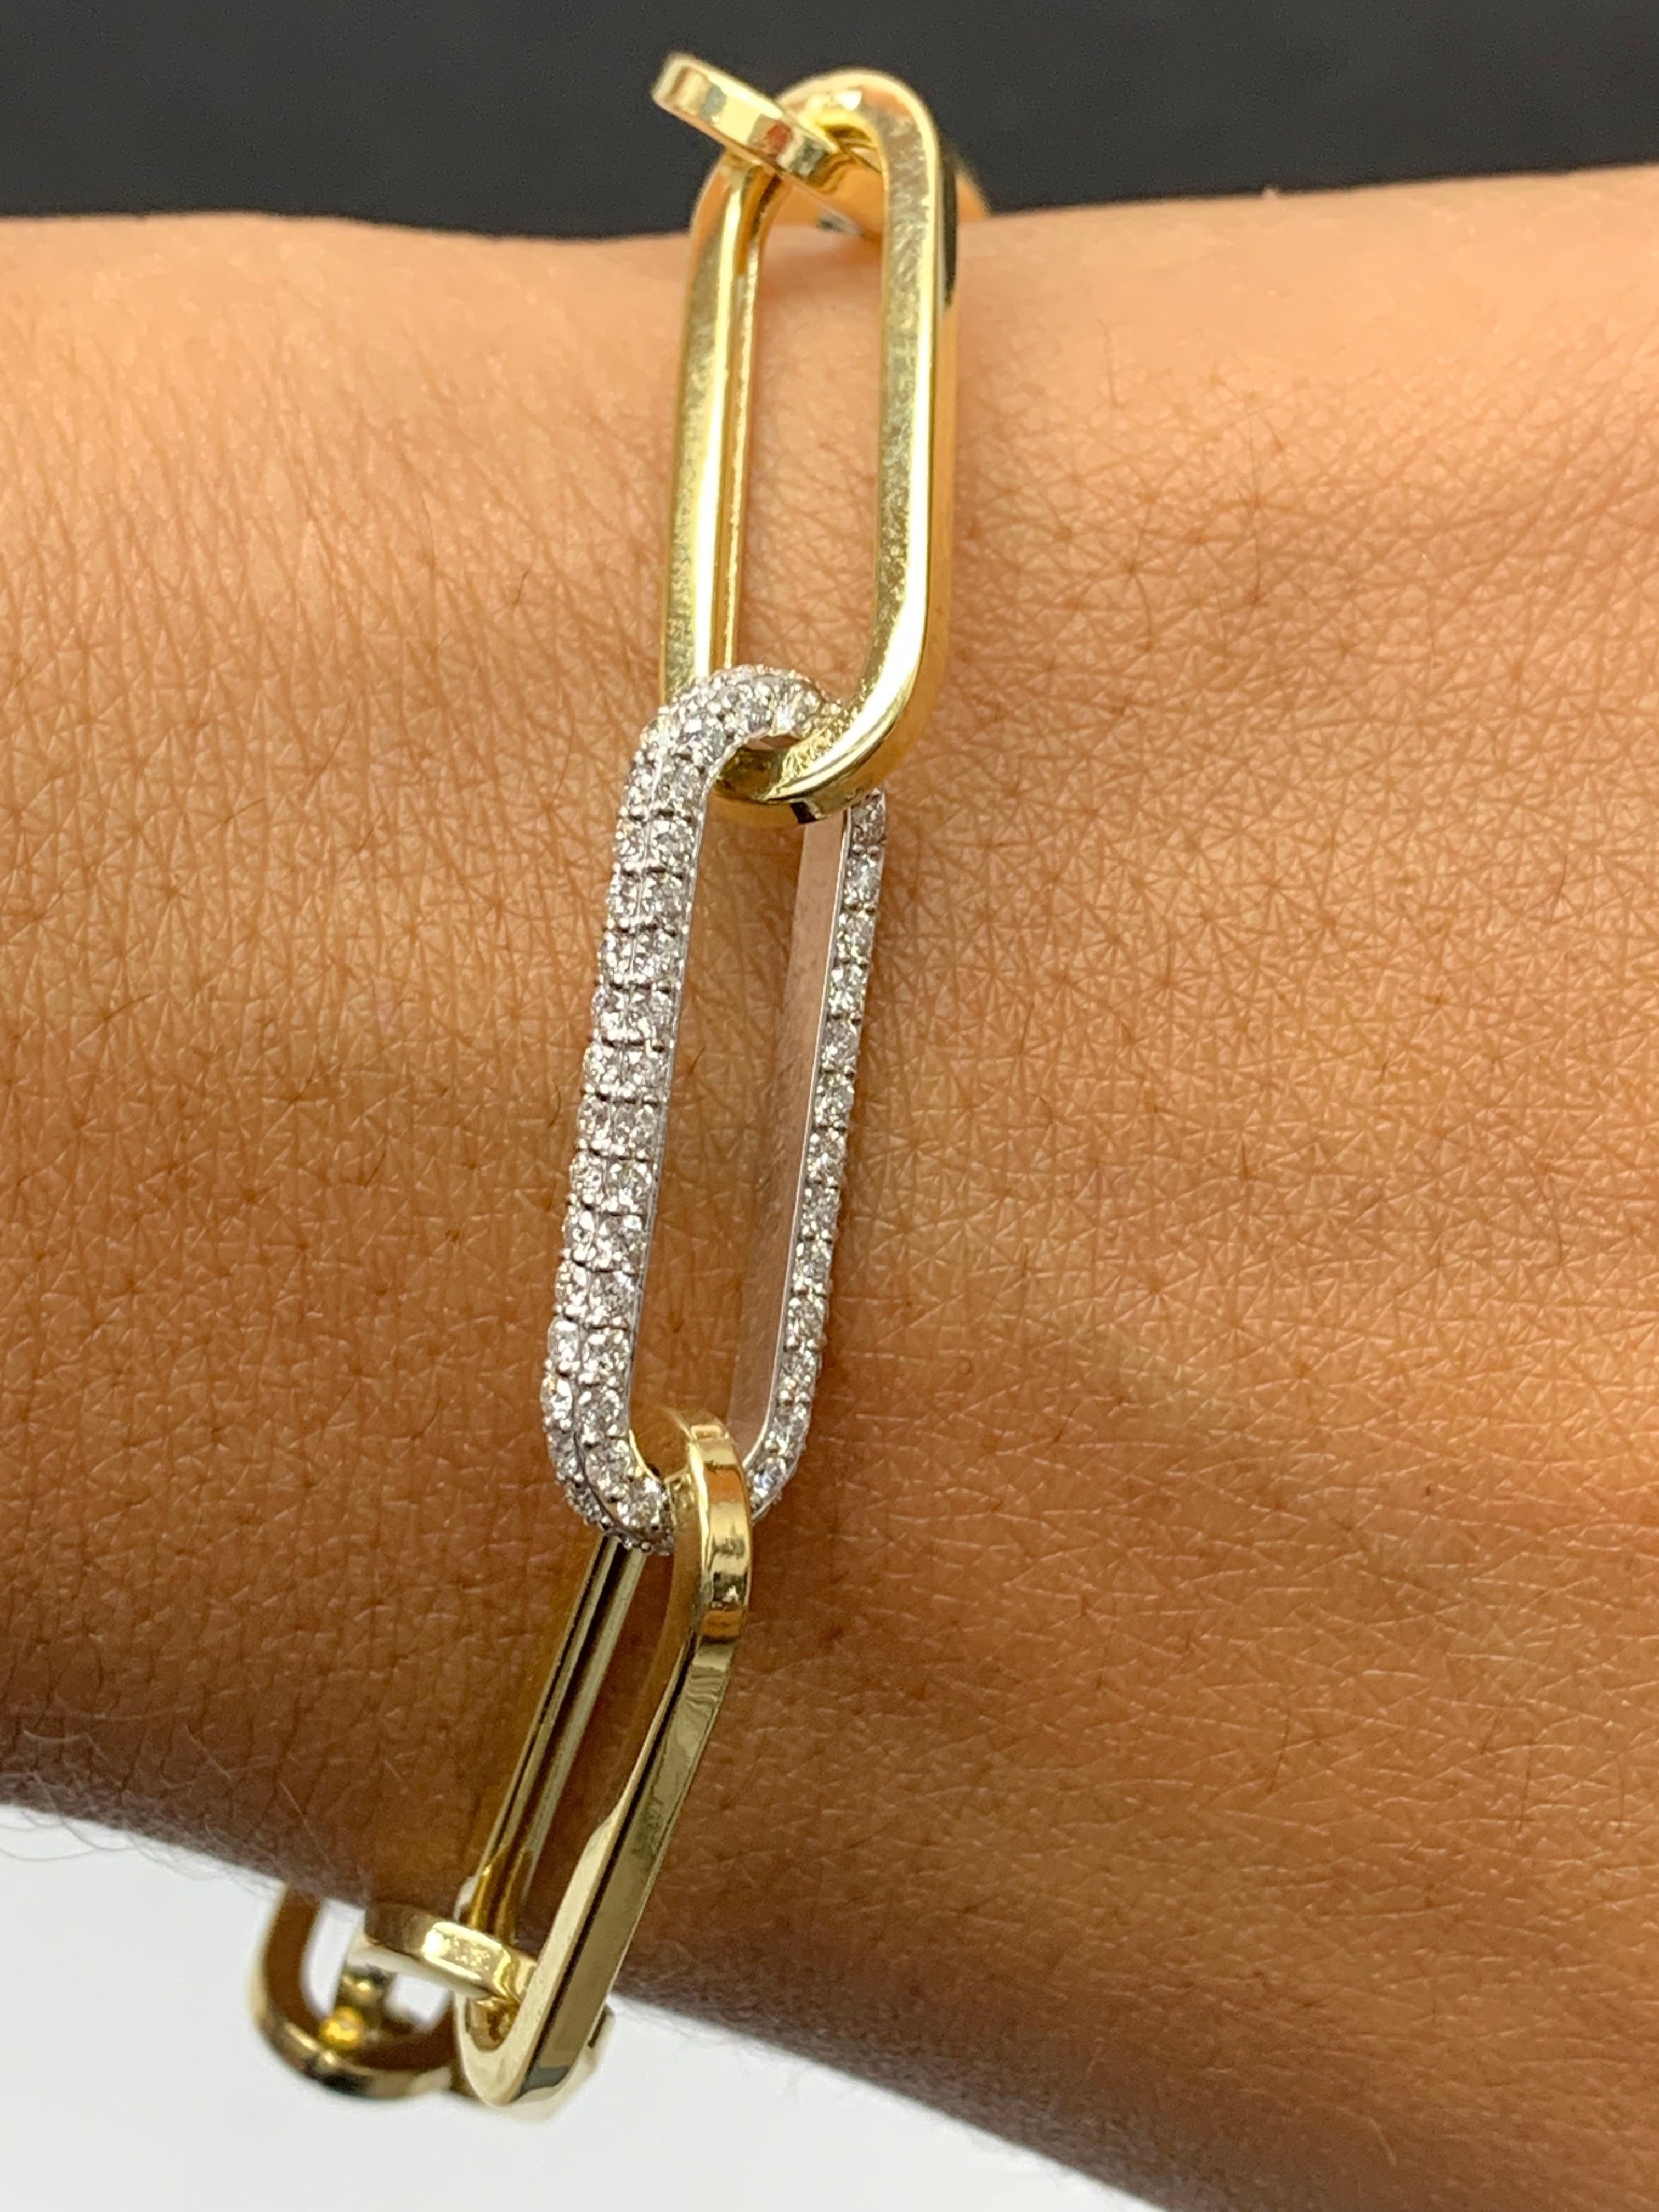 0.93 Carat Diamond Paper Clip Bracelet in 14K Yellow Gold and White Gold For Sale 2